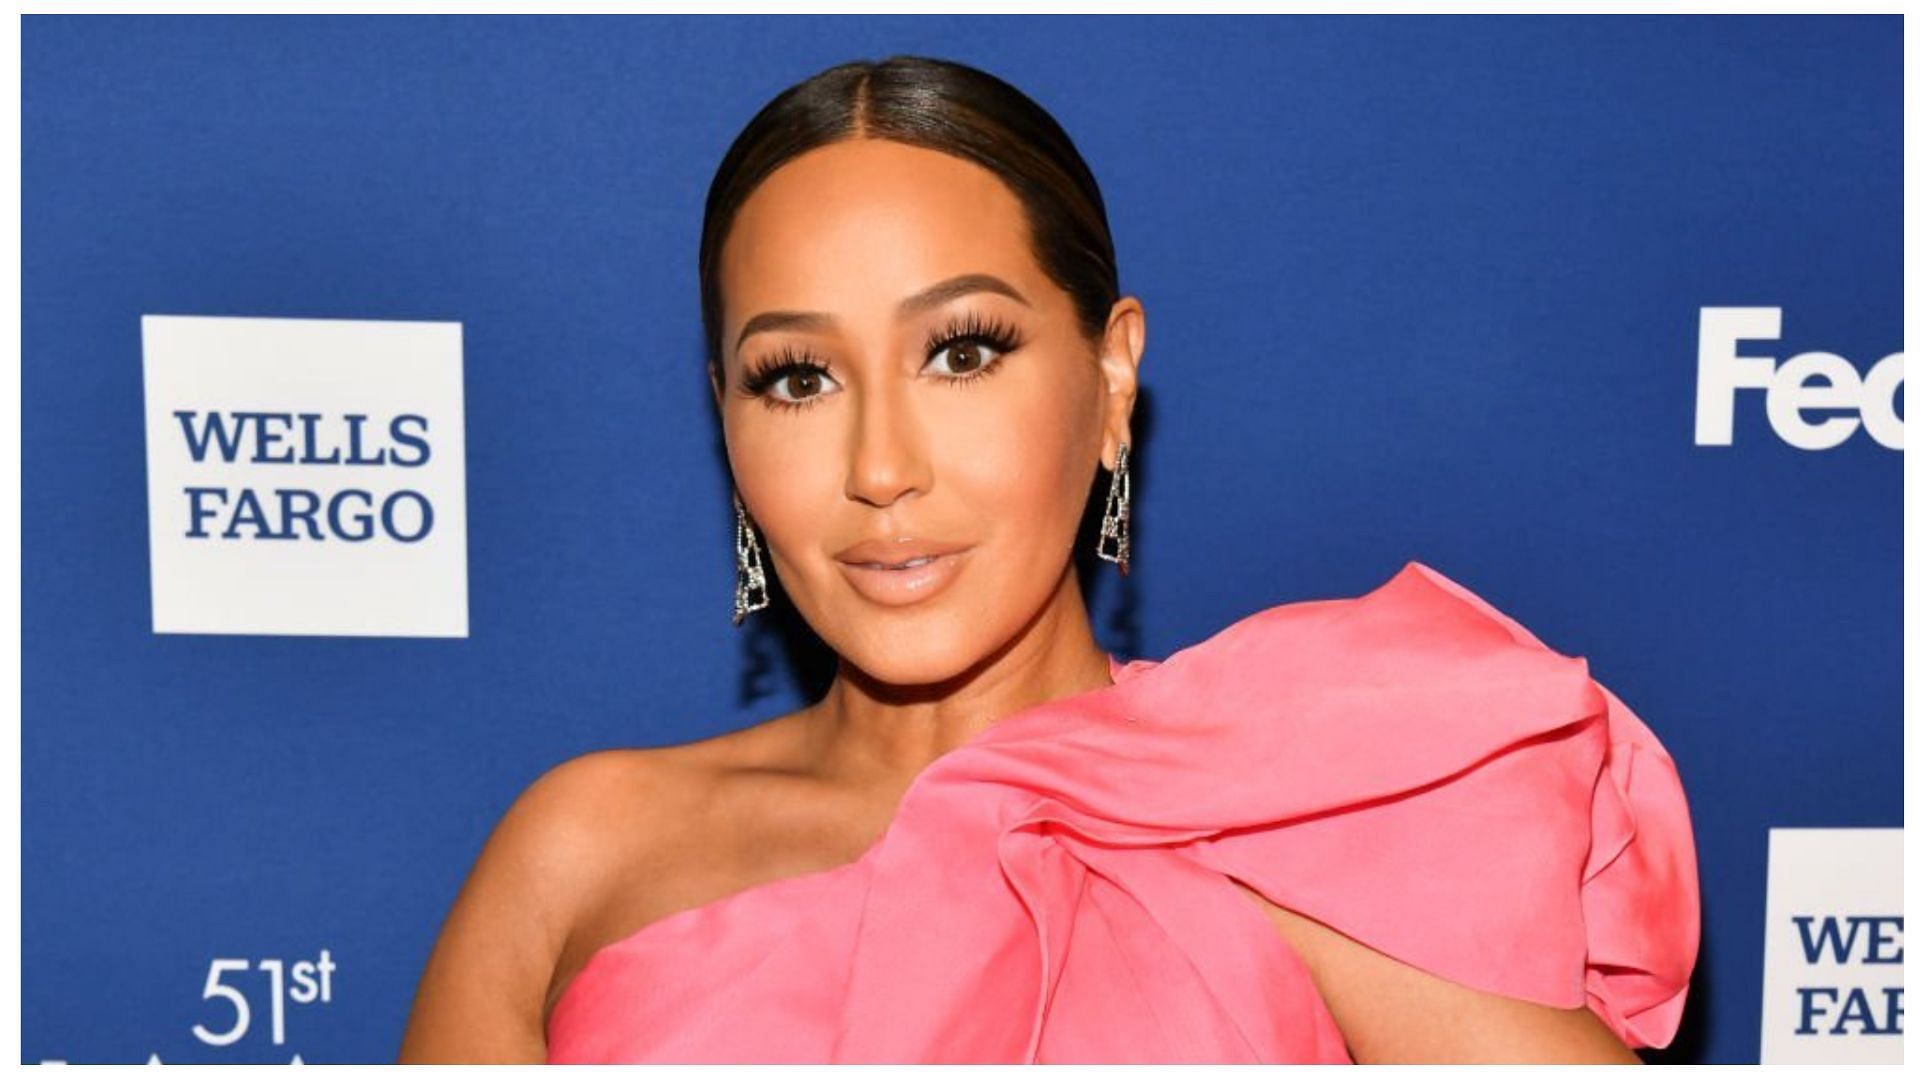 Adrienne Bailon recently welcomed her first child through surrogacy (Image via Rodin Eckenroth/Getty Images)